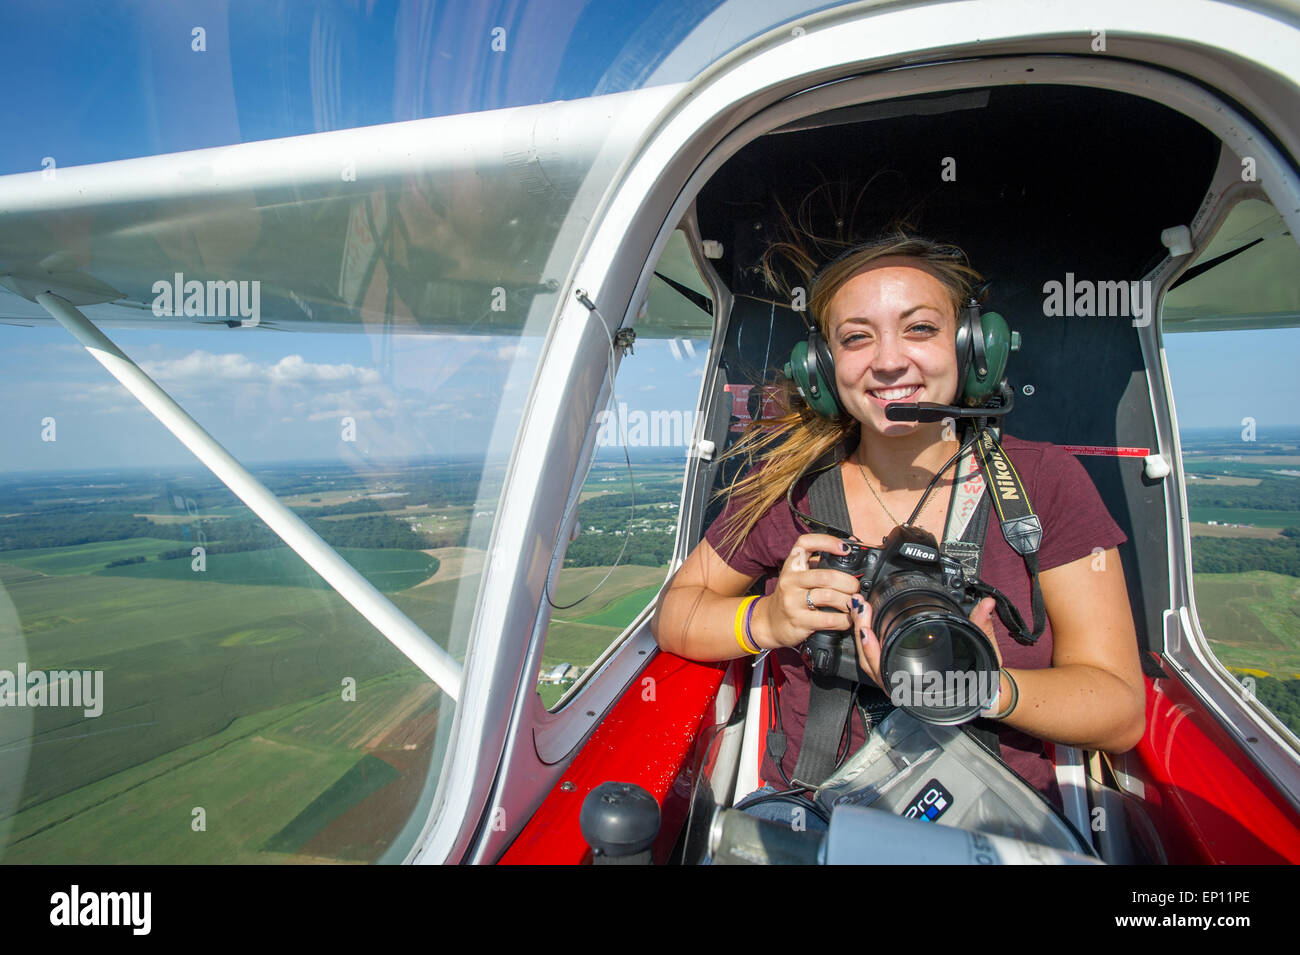 Smiling female photographer holding camera in small airplane while airborne, in Ridgley, Maryland, USA Stock Photo